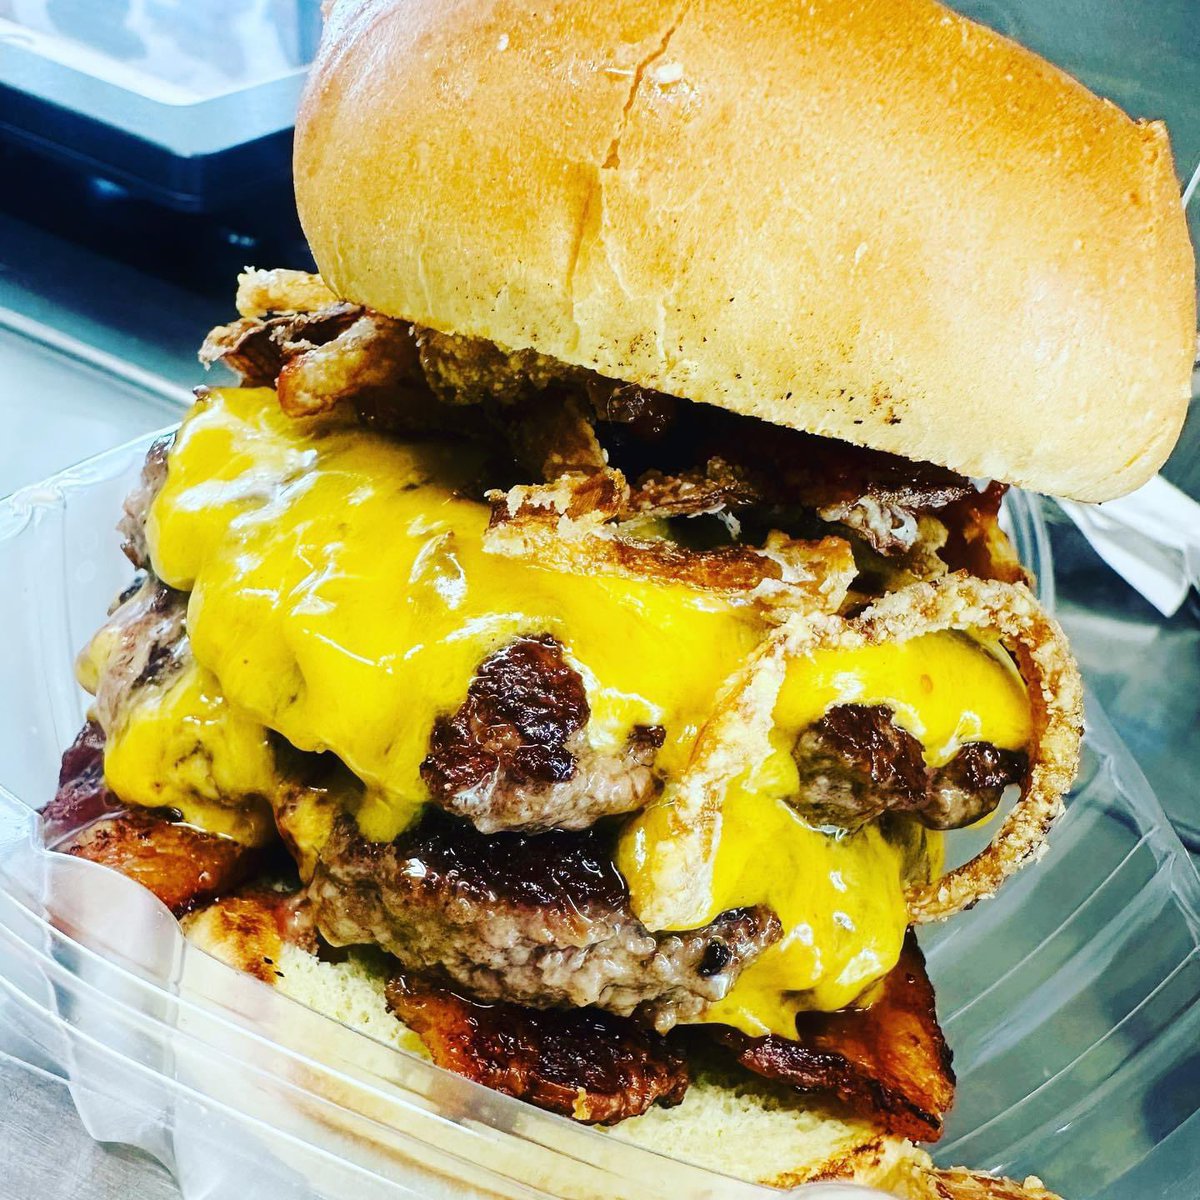 Hey @MITstudents , we’re coming to ya today at the Outfinite Corridor, 11-2p!
Be there & be awesome with us!

🤘🍔🤘
Hail & Grill! 
#eatlocal #foodporn #metal #foodie #bostonfoodtrucks #burgertime #bostoneats #pubgrub #barfood #drinklocal #lemmy #cambridgema #lemmyburger #mit